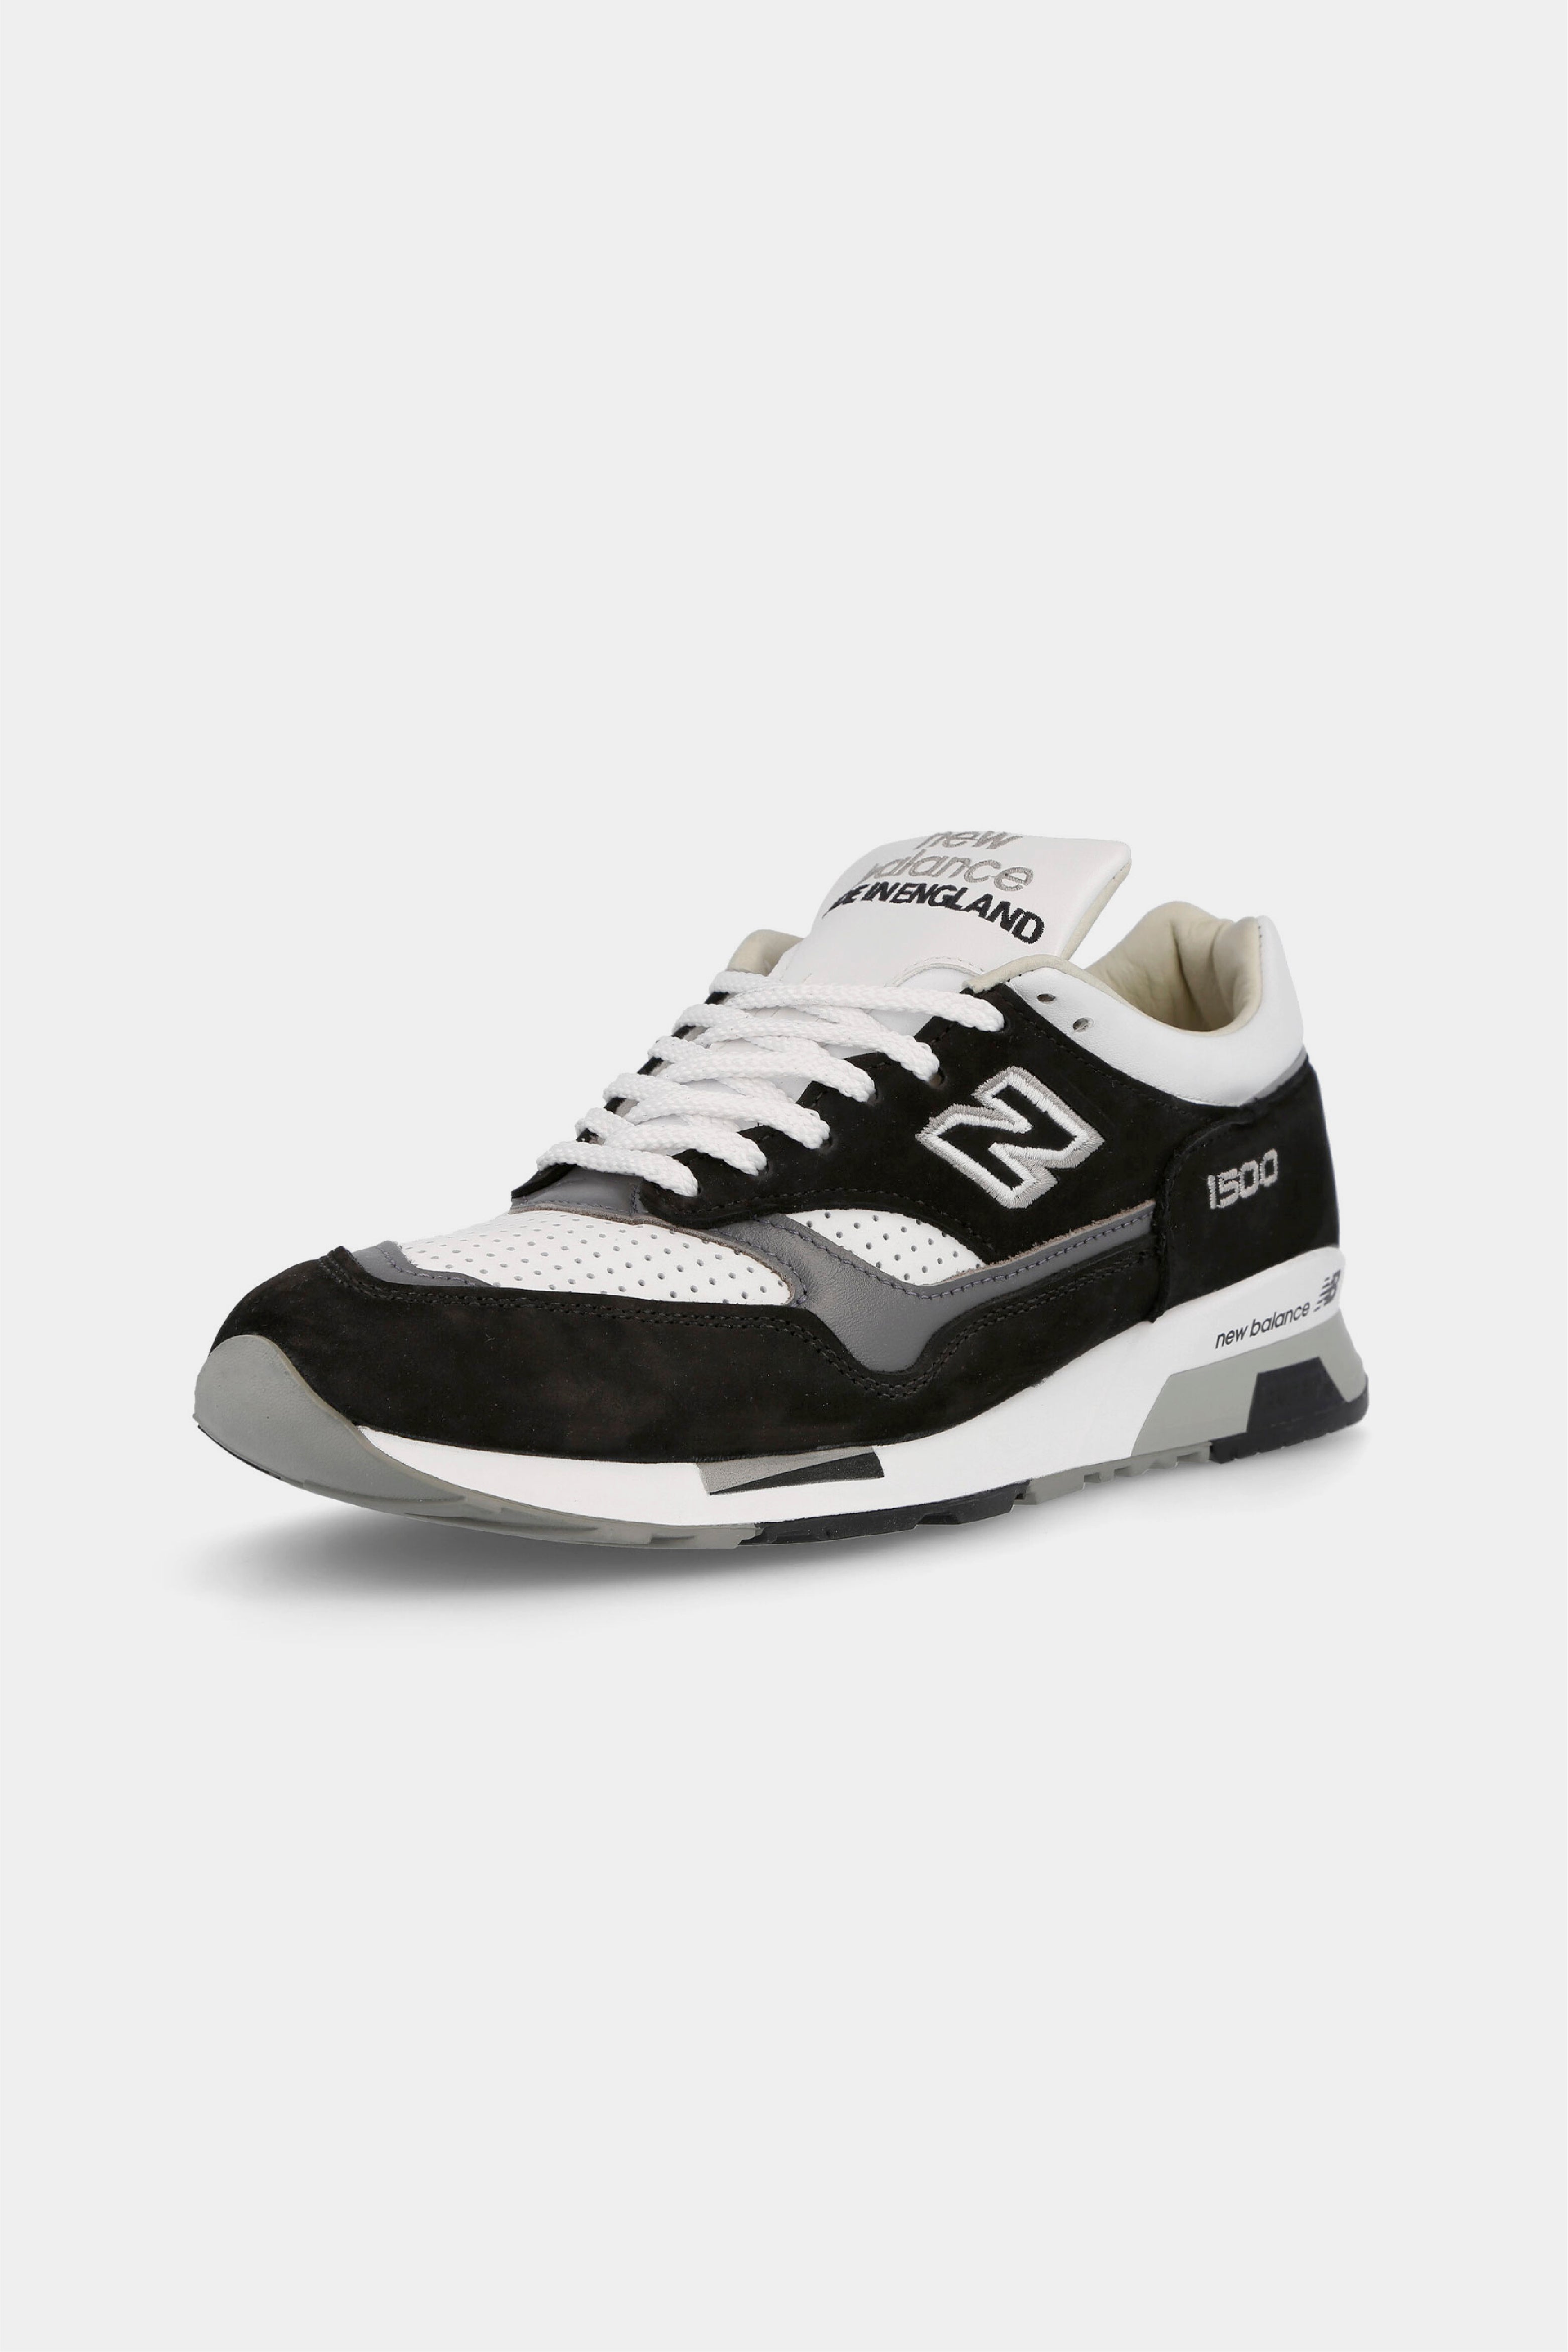 Selectshop FRAME - NEW BALANCE 1500 Made In England Footwear Concept Store Dubai